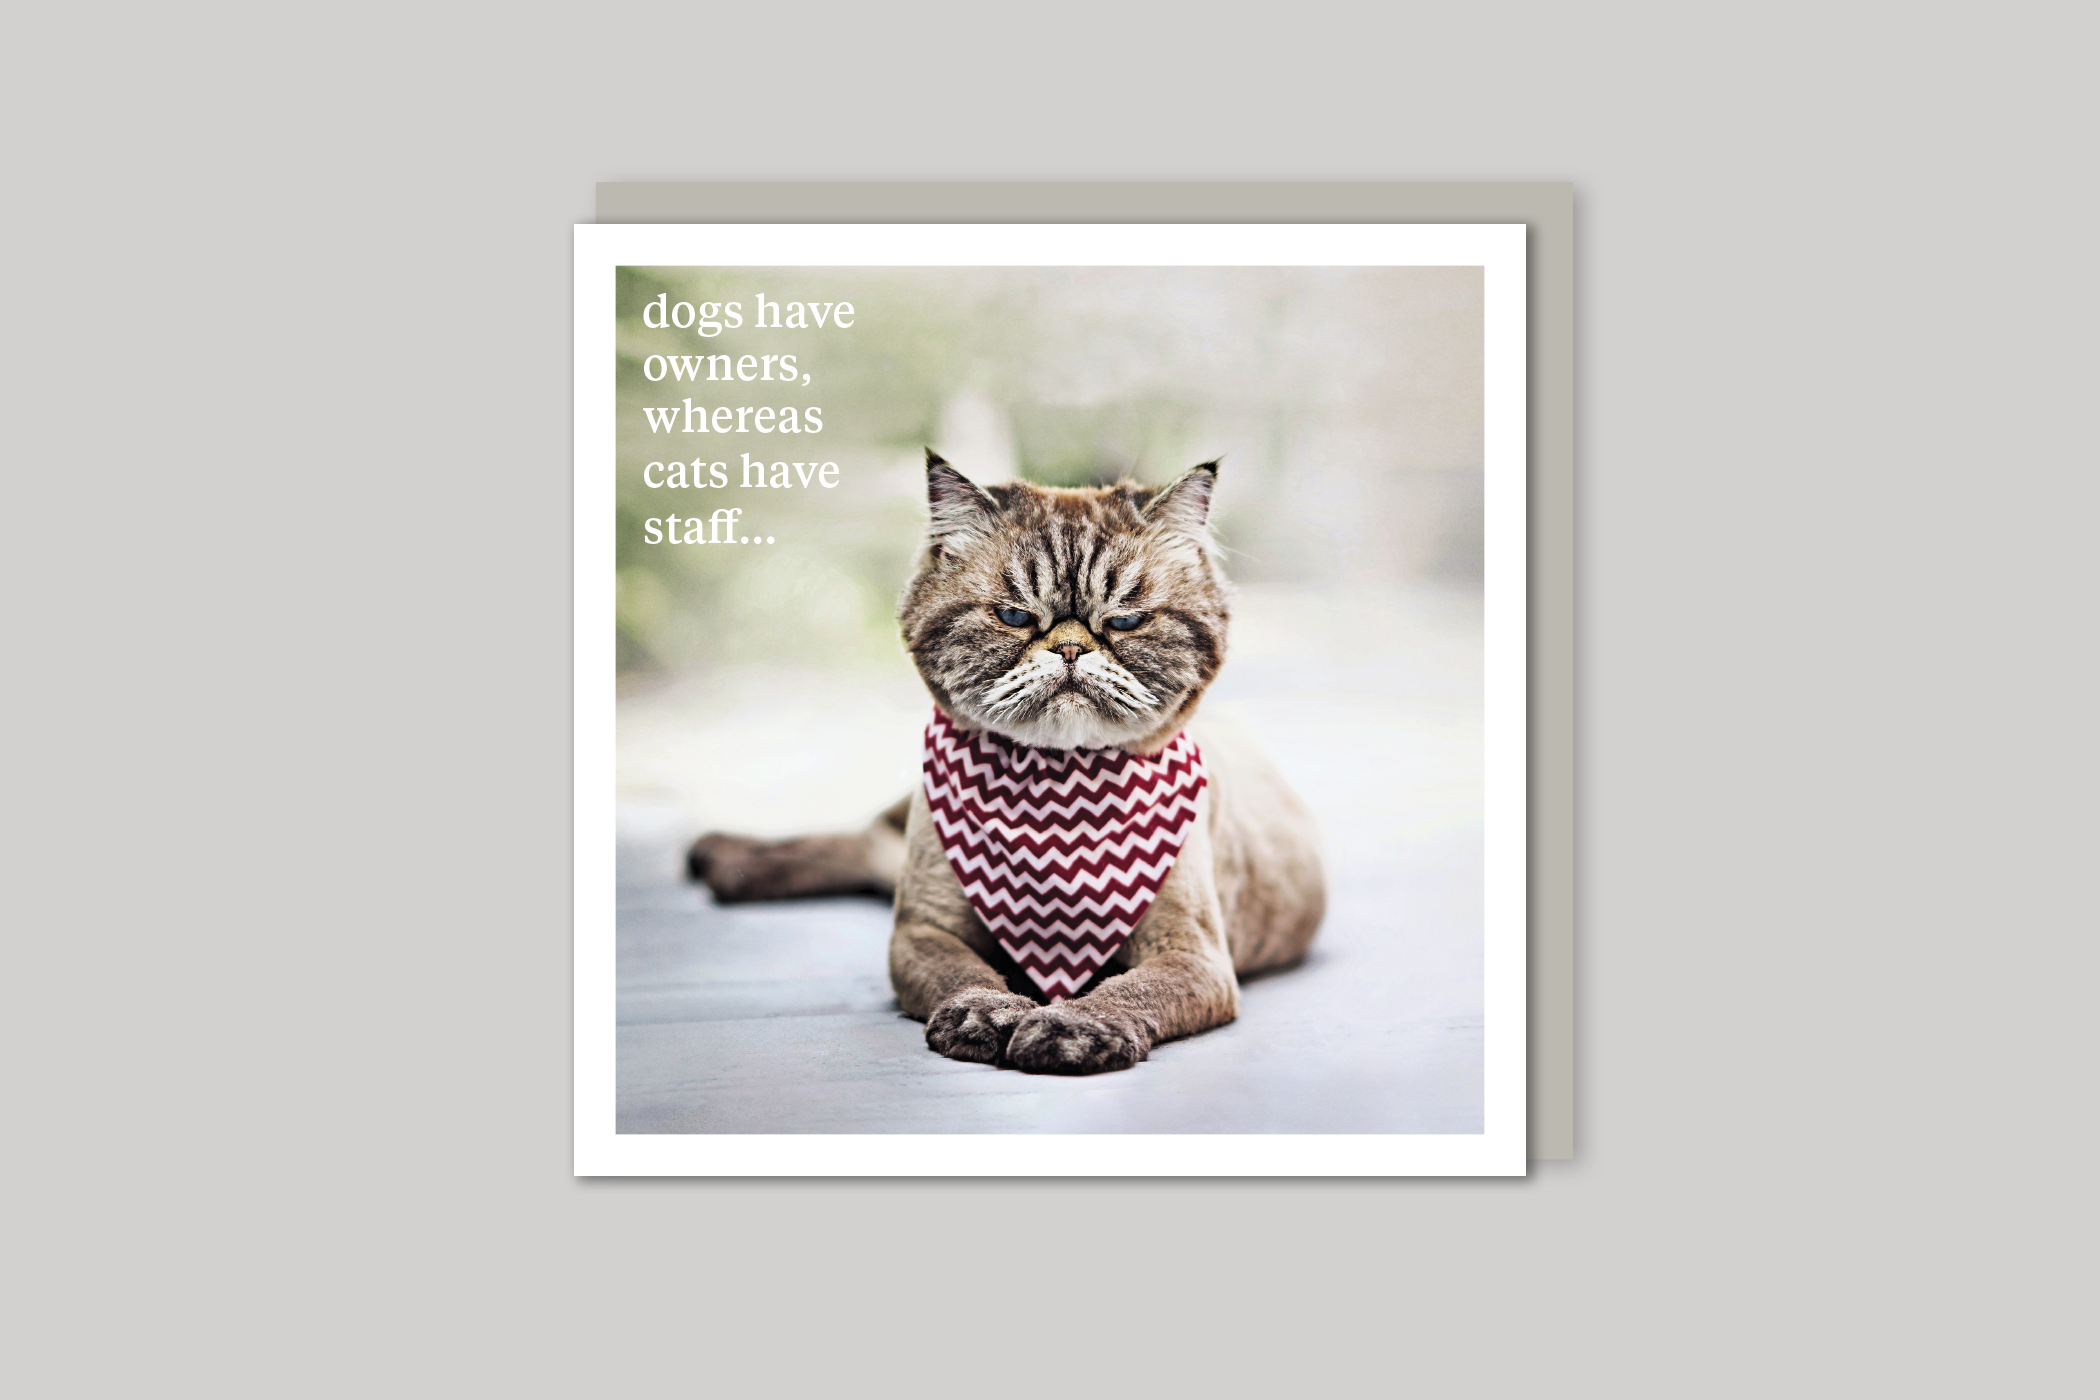 Cats Have Staff quirky animal portrait from Curious World range of greeting cards by Icon, back page.